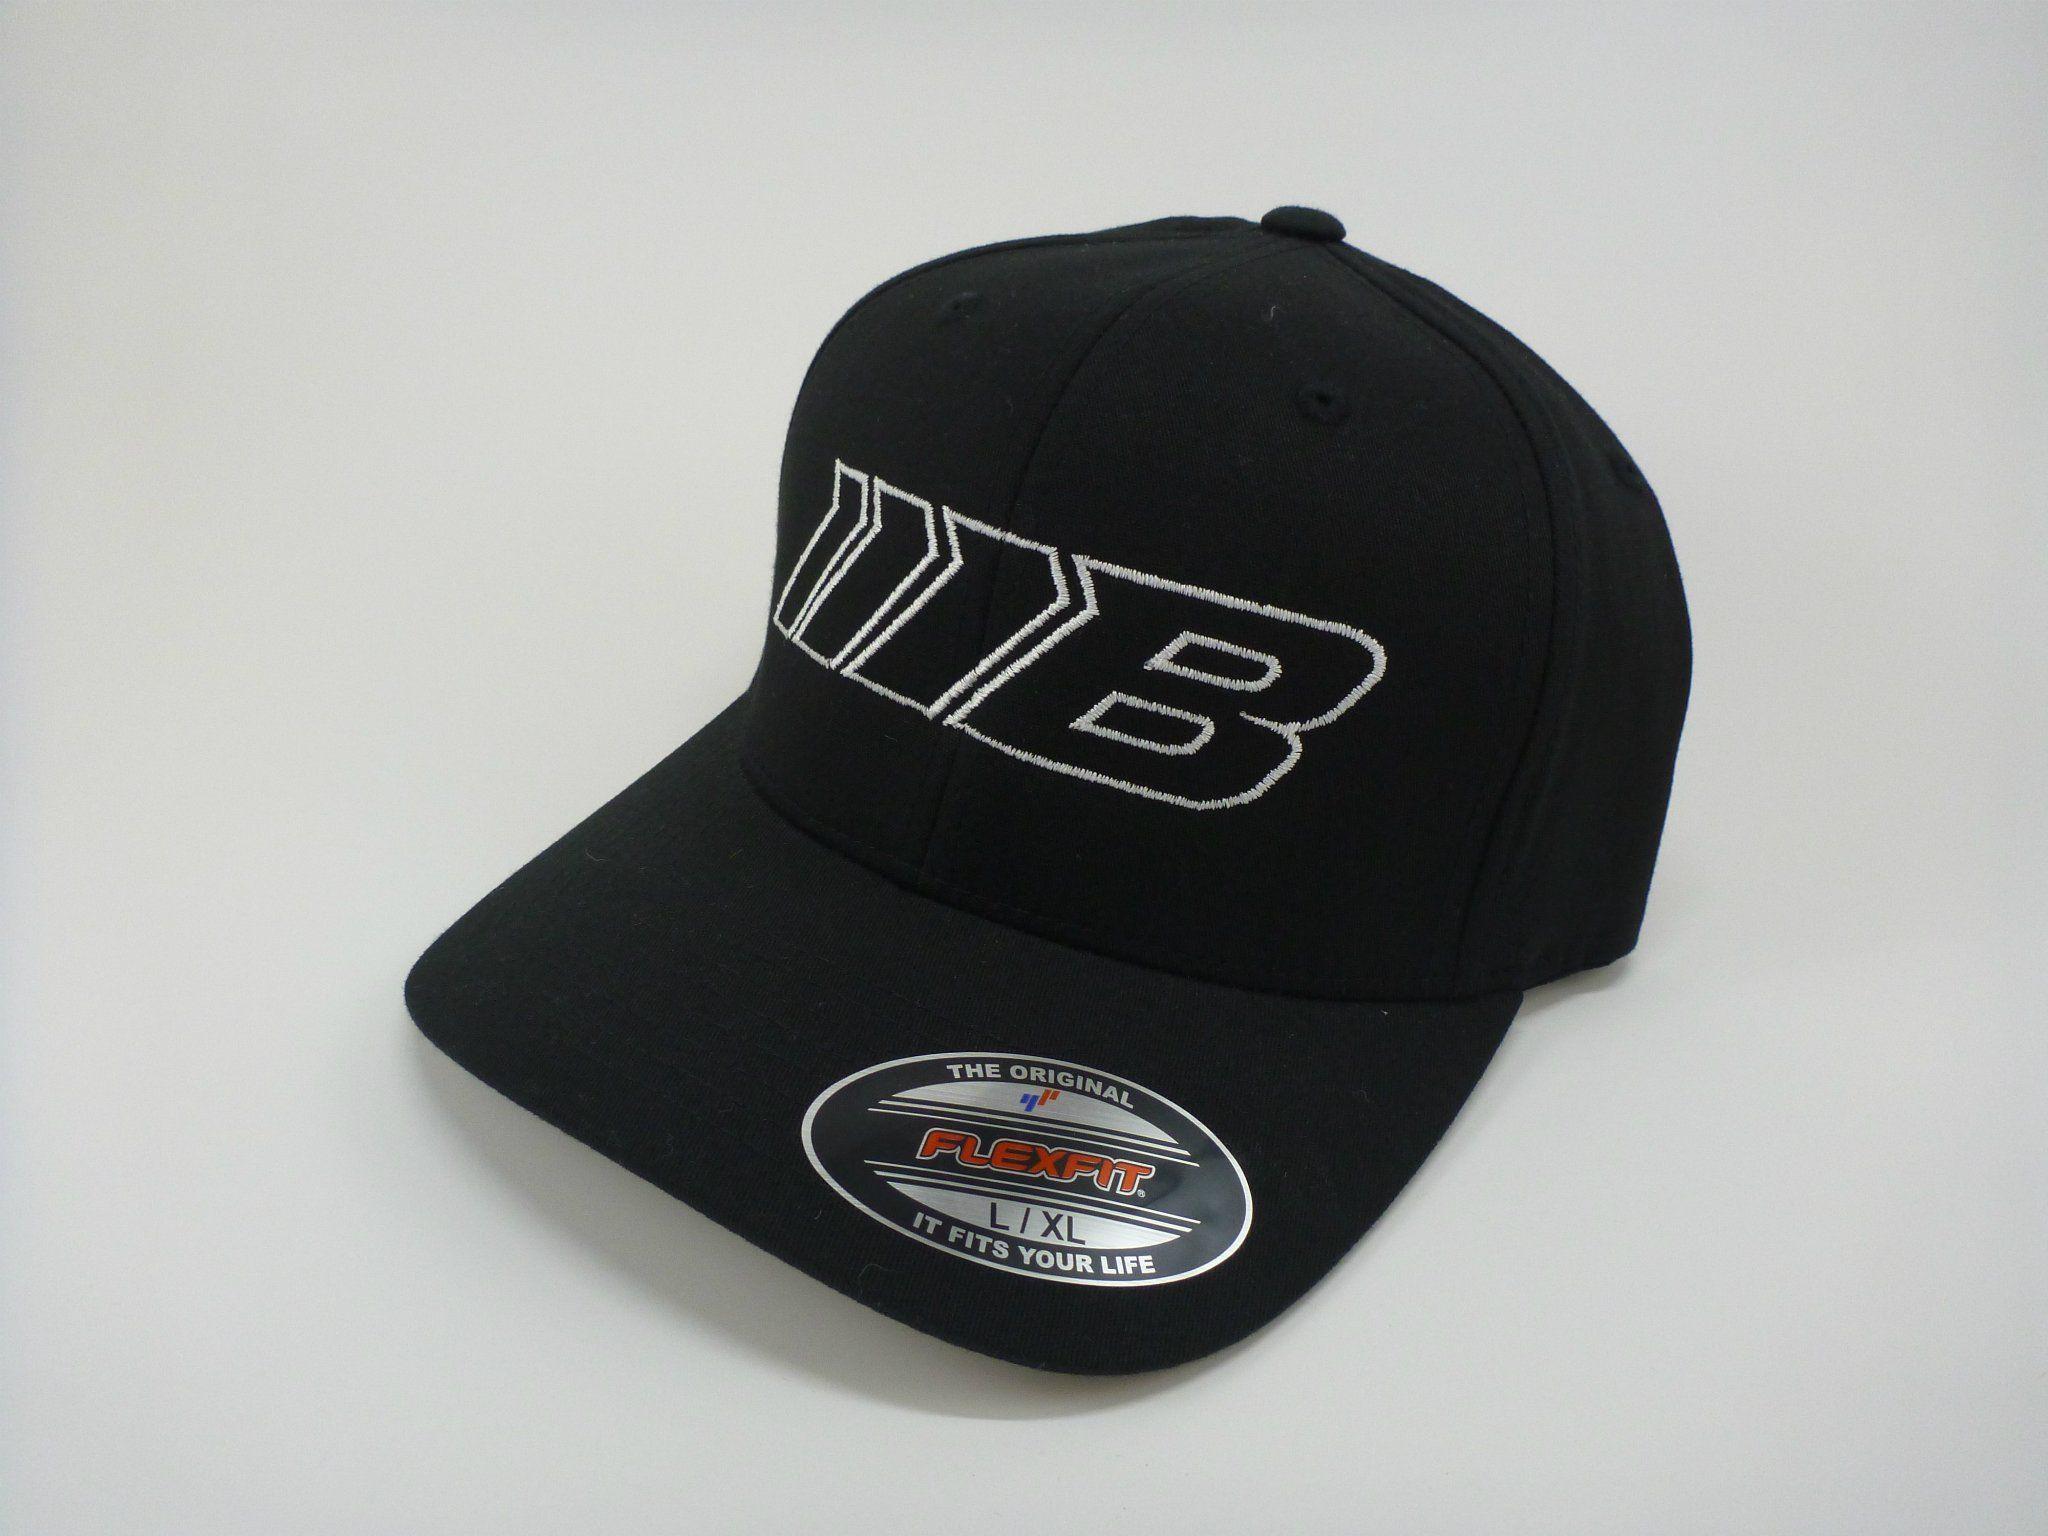 Green with White Outline Logo - Borg Motorsports Outline Logo Hat with Green or White Logo